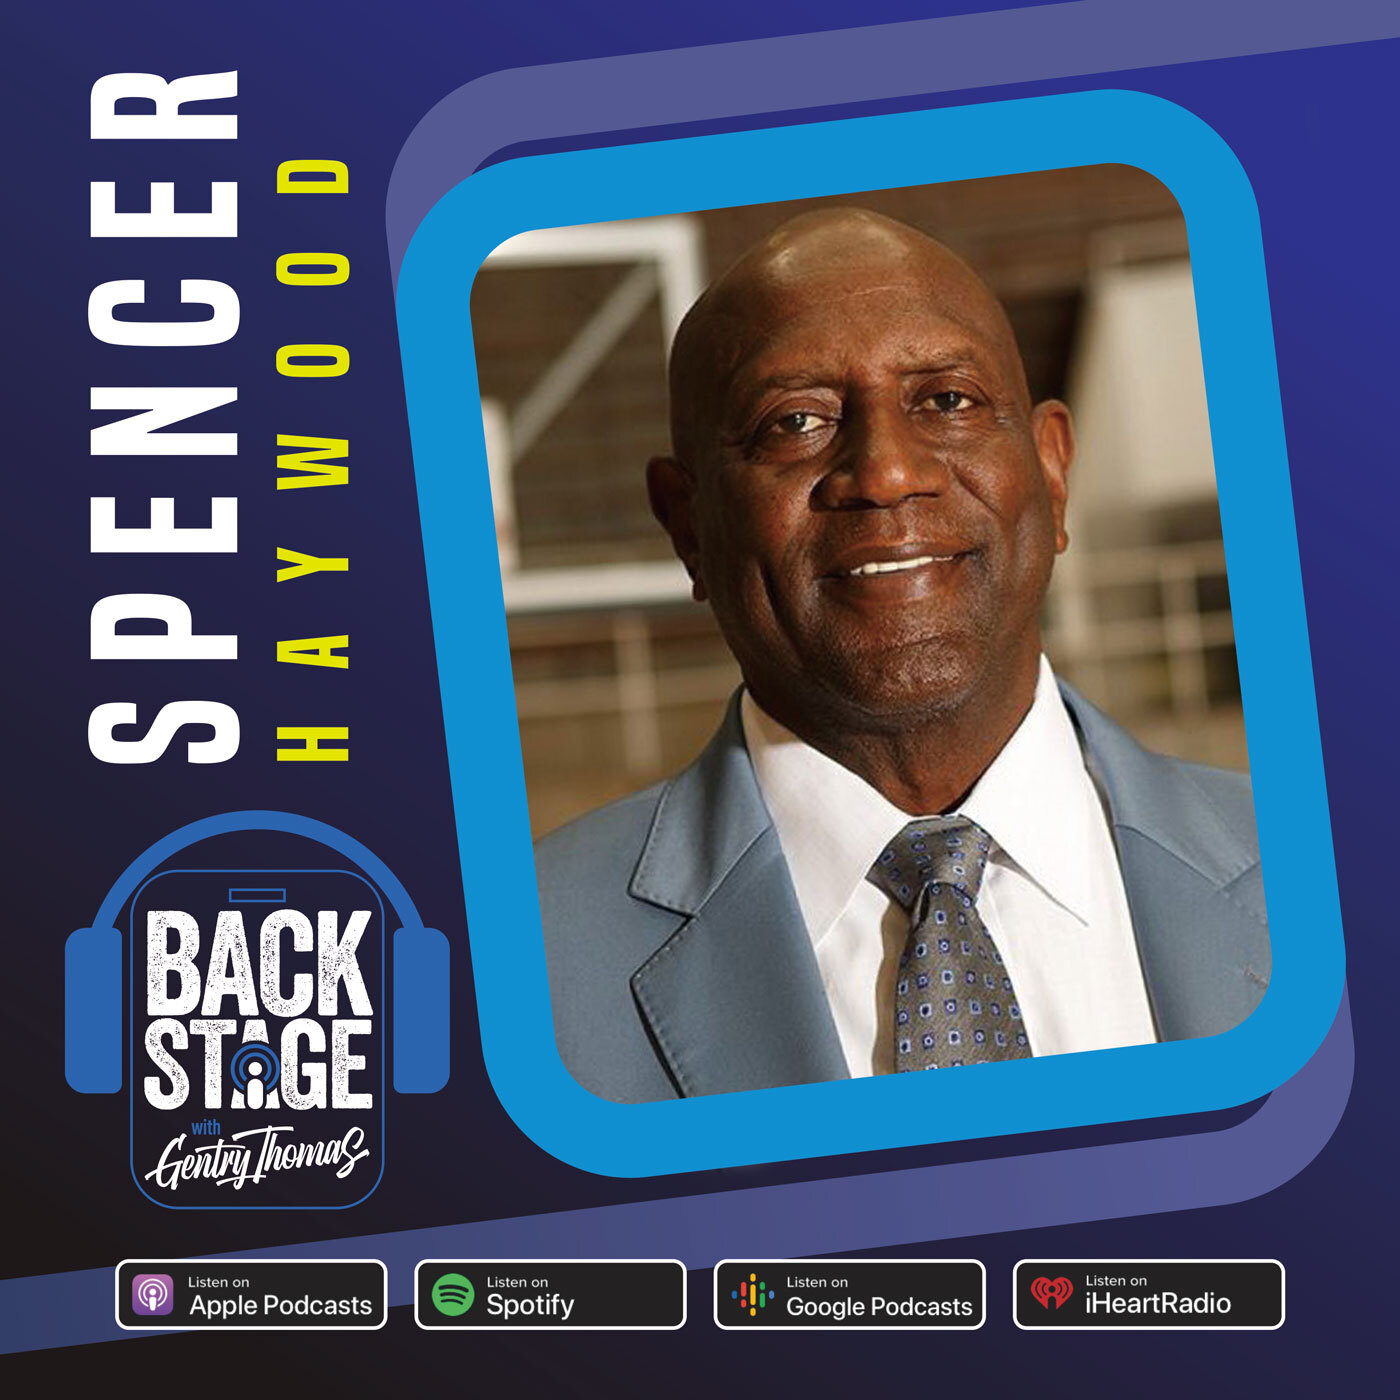 Spencer Haywood took the NBA to the Supreme Court and scored big for players today